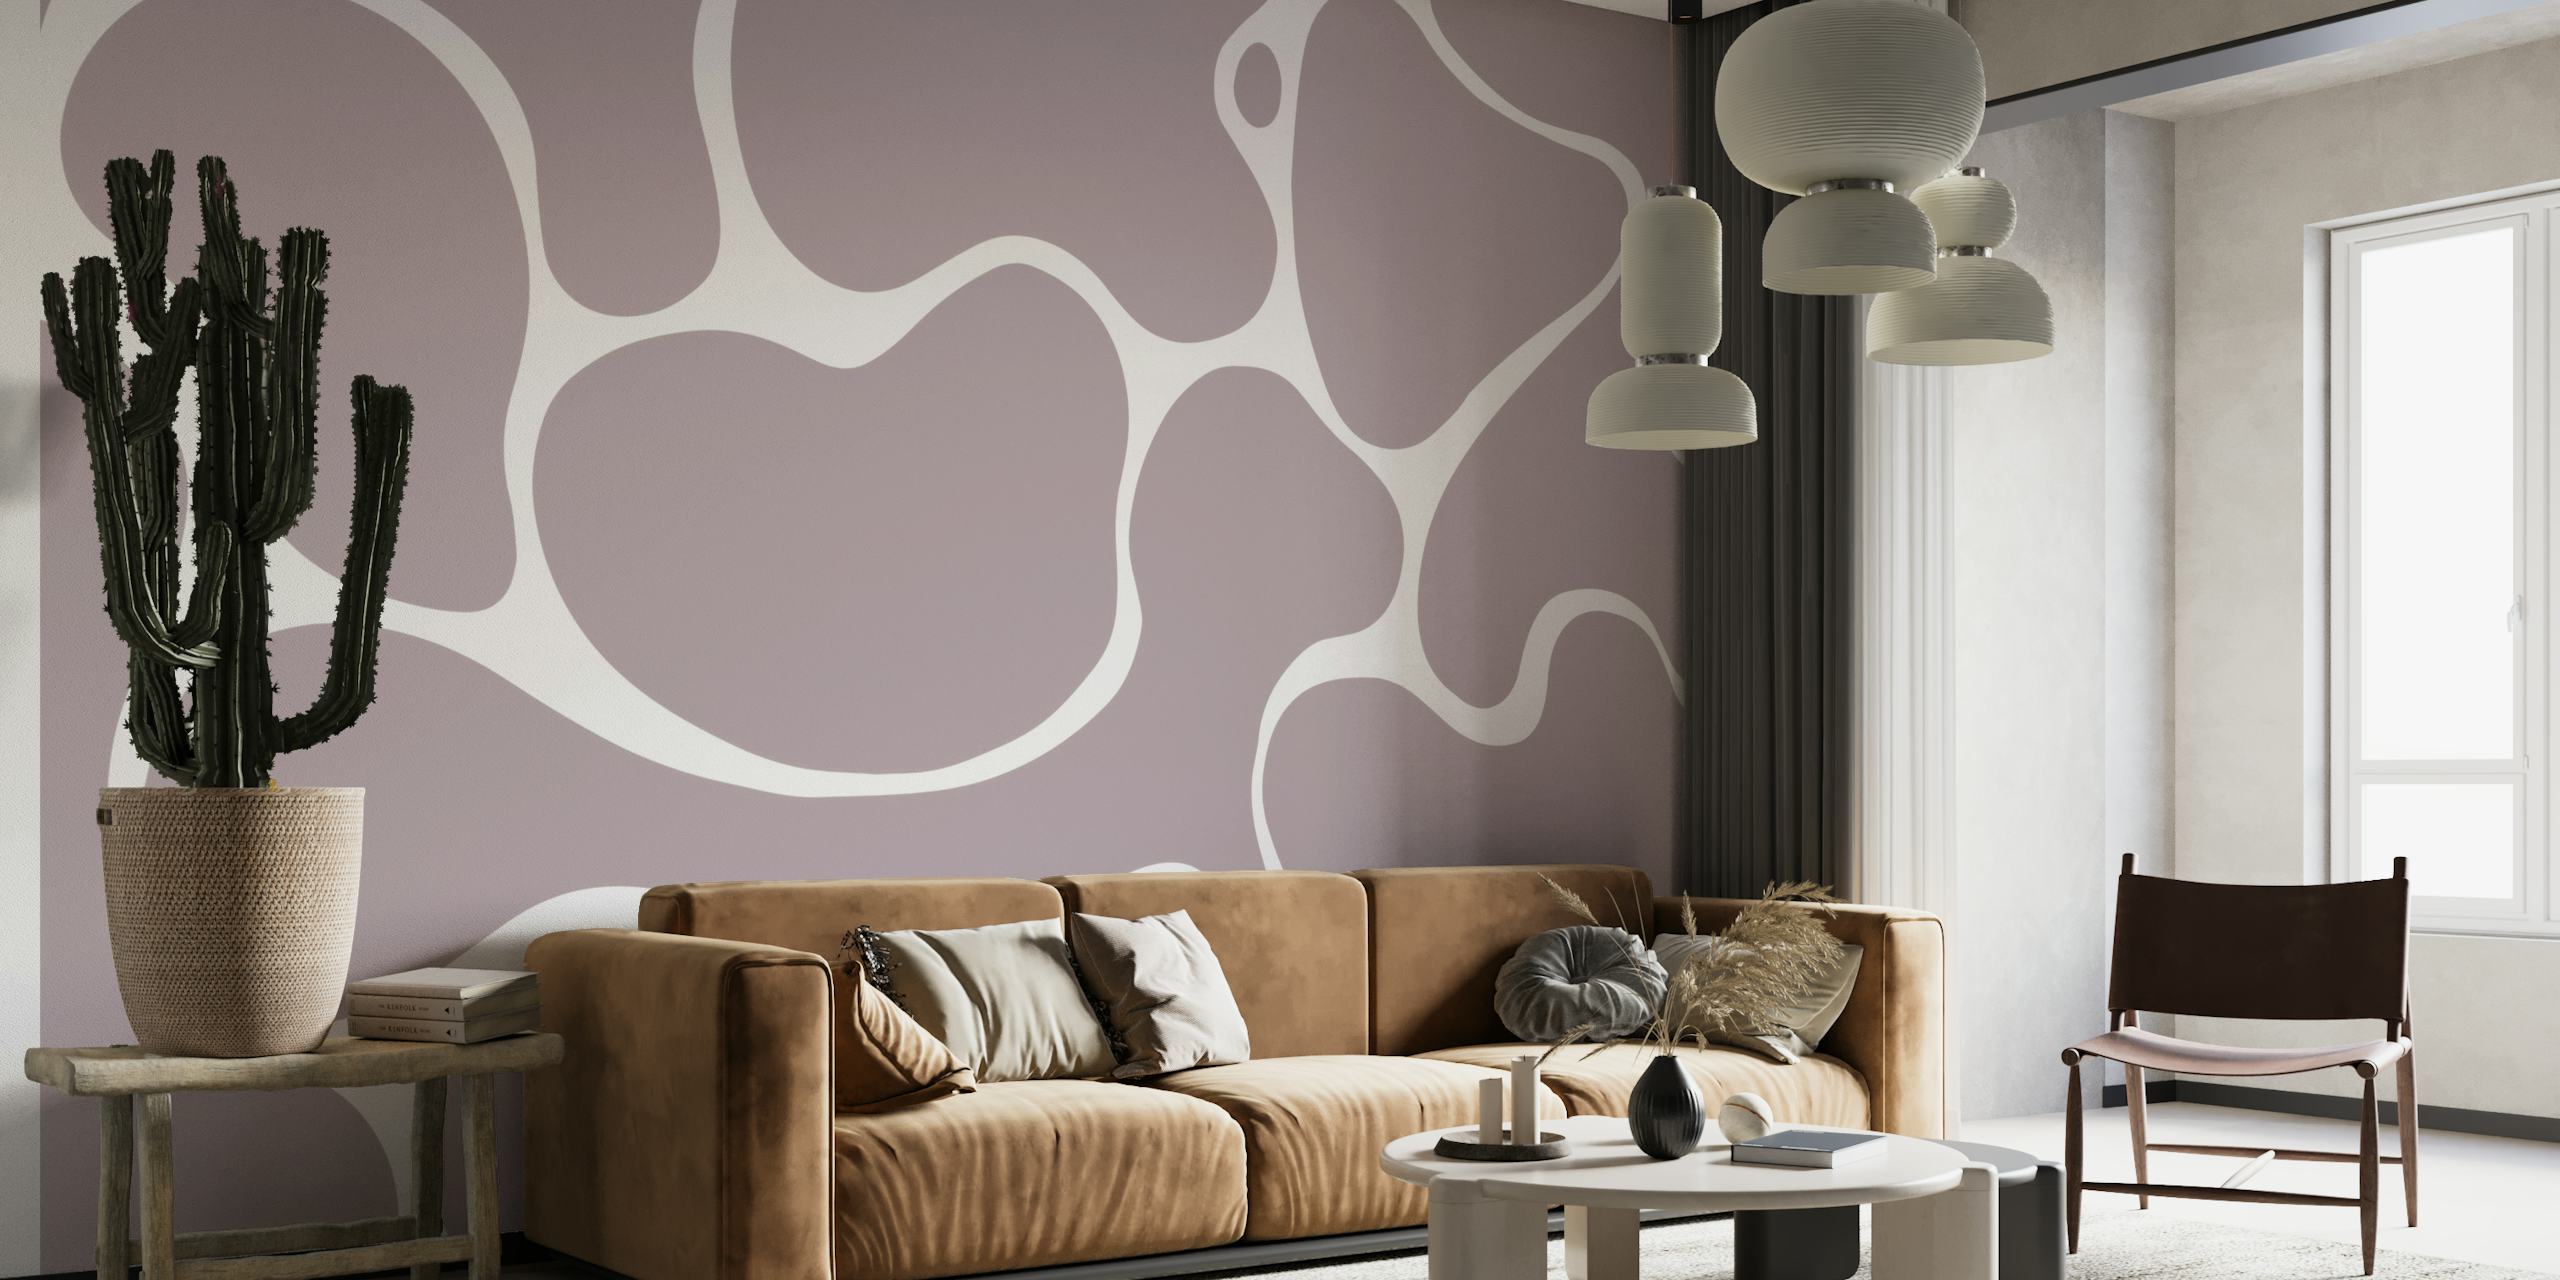 Minimalist midcentury abstract pattern wall mural in muted colors